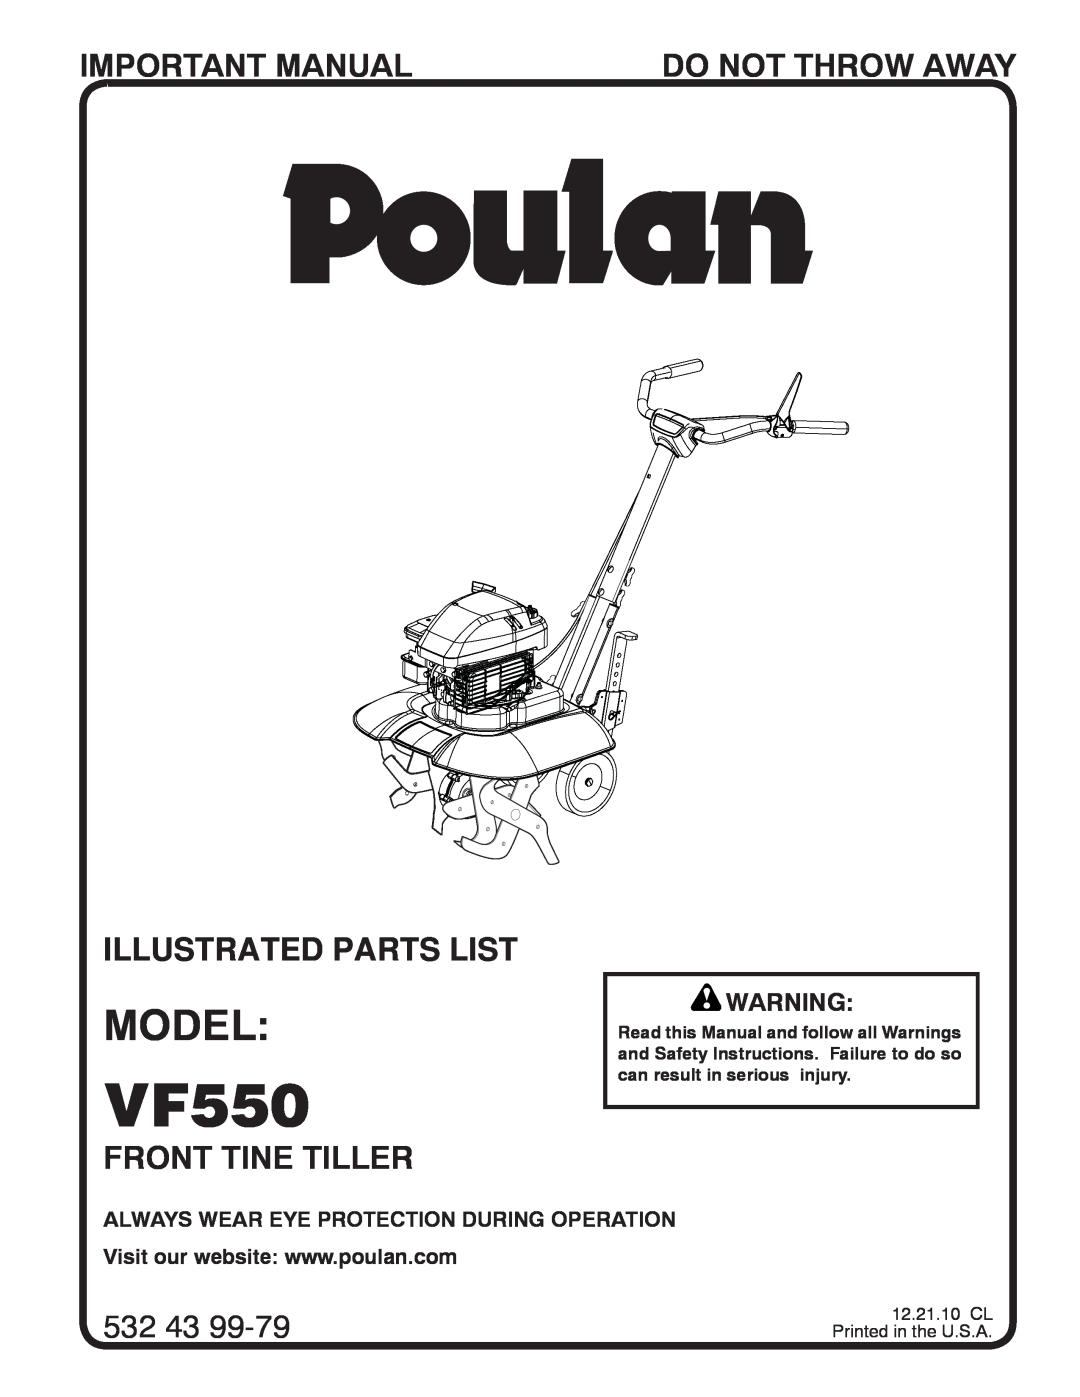 Poulan VF550 manual Model, Important Manual, Do Not Throw Away, Illustrated Parts List, Front Tine Tiller, 532 